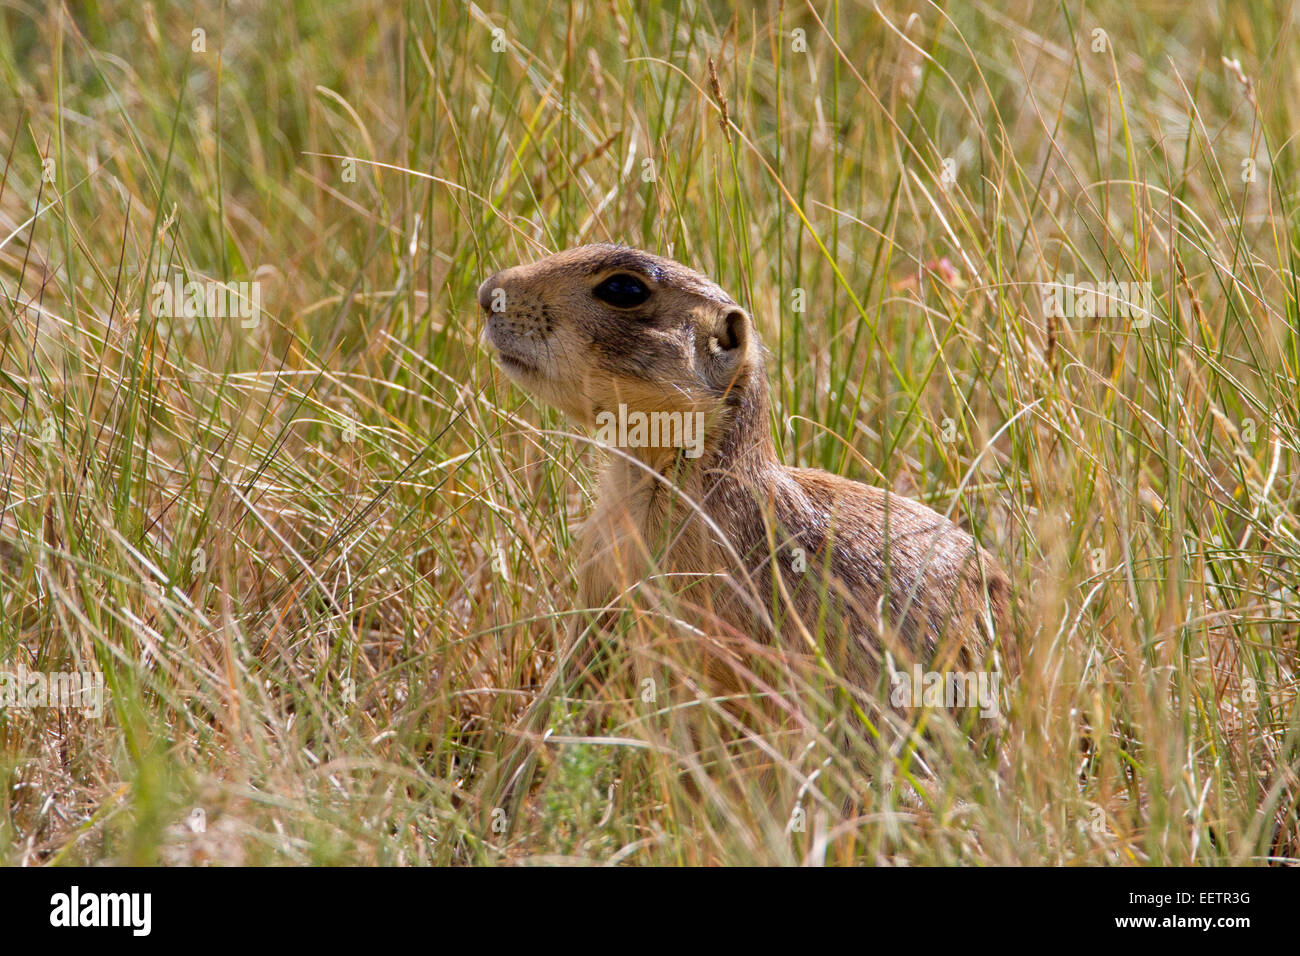 Utah Prairie Dog (Cynomys parvidens)  in a meadow of tall grasses at Bryce Canyon National Park, Utah, USA in July Stock Photo